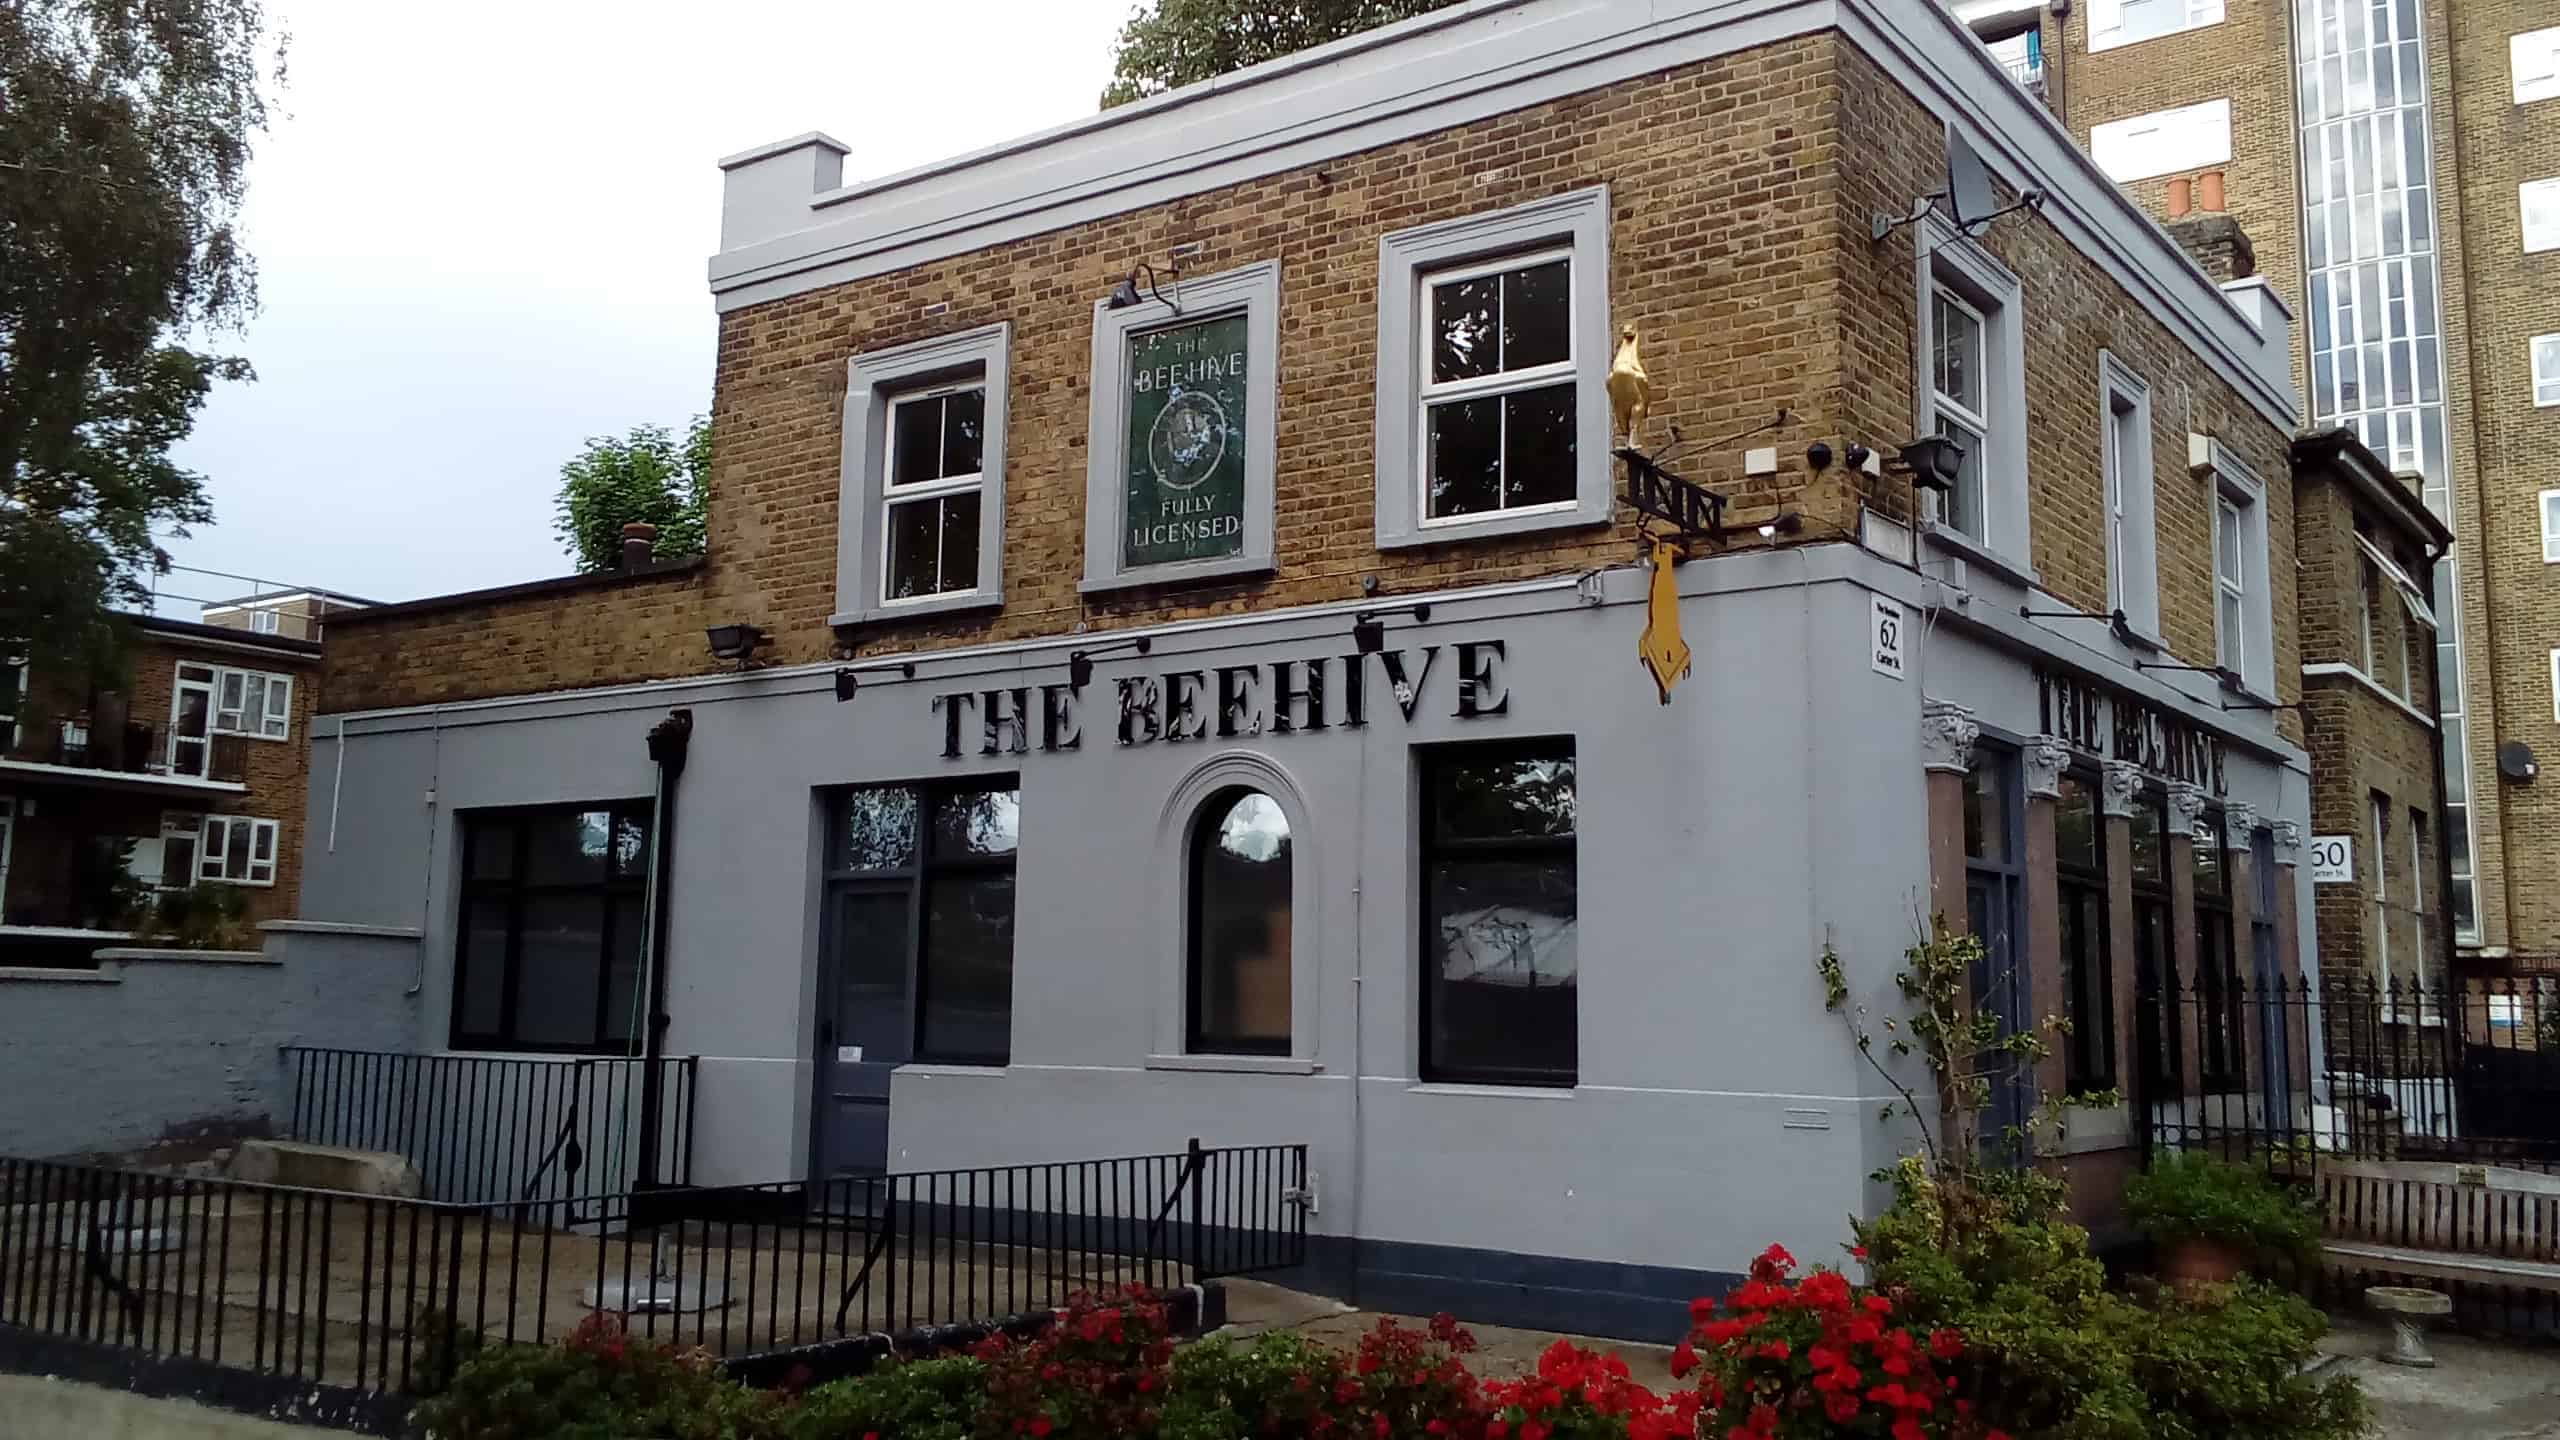 The Beehive in Walworth's Carter Street